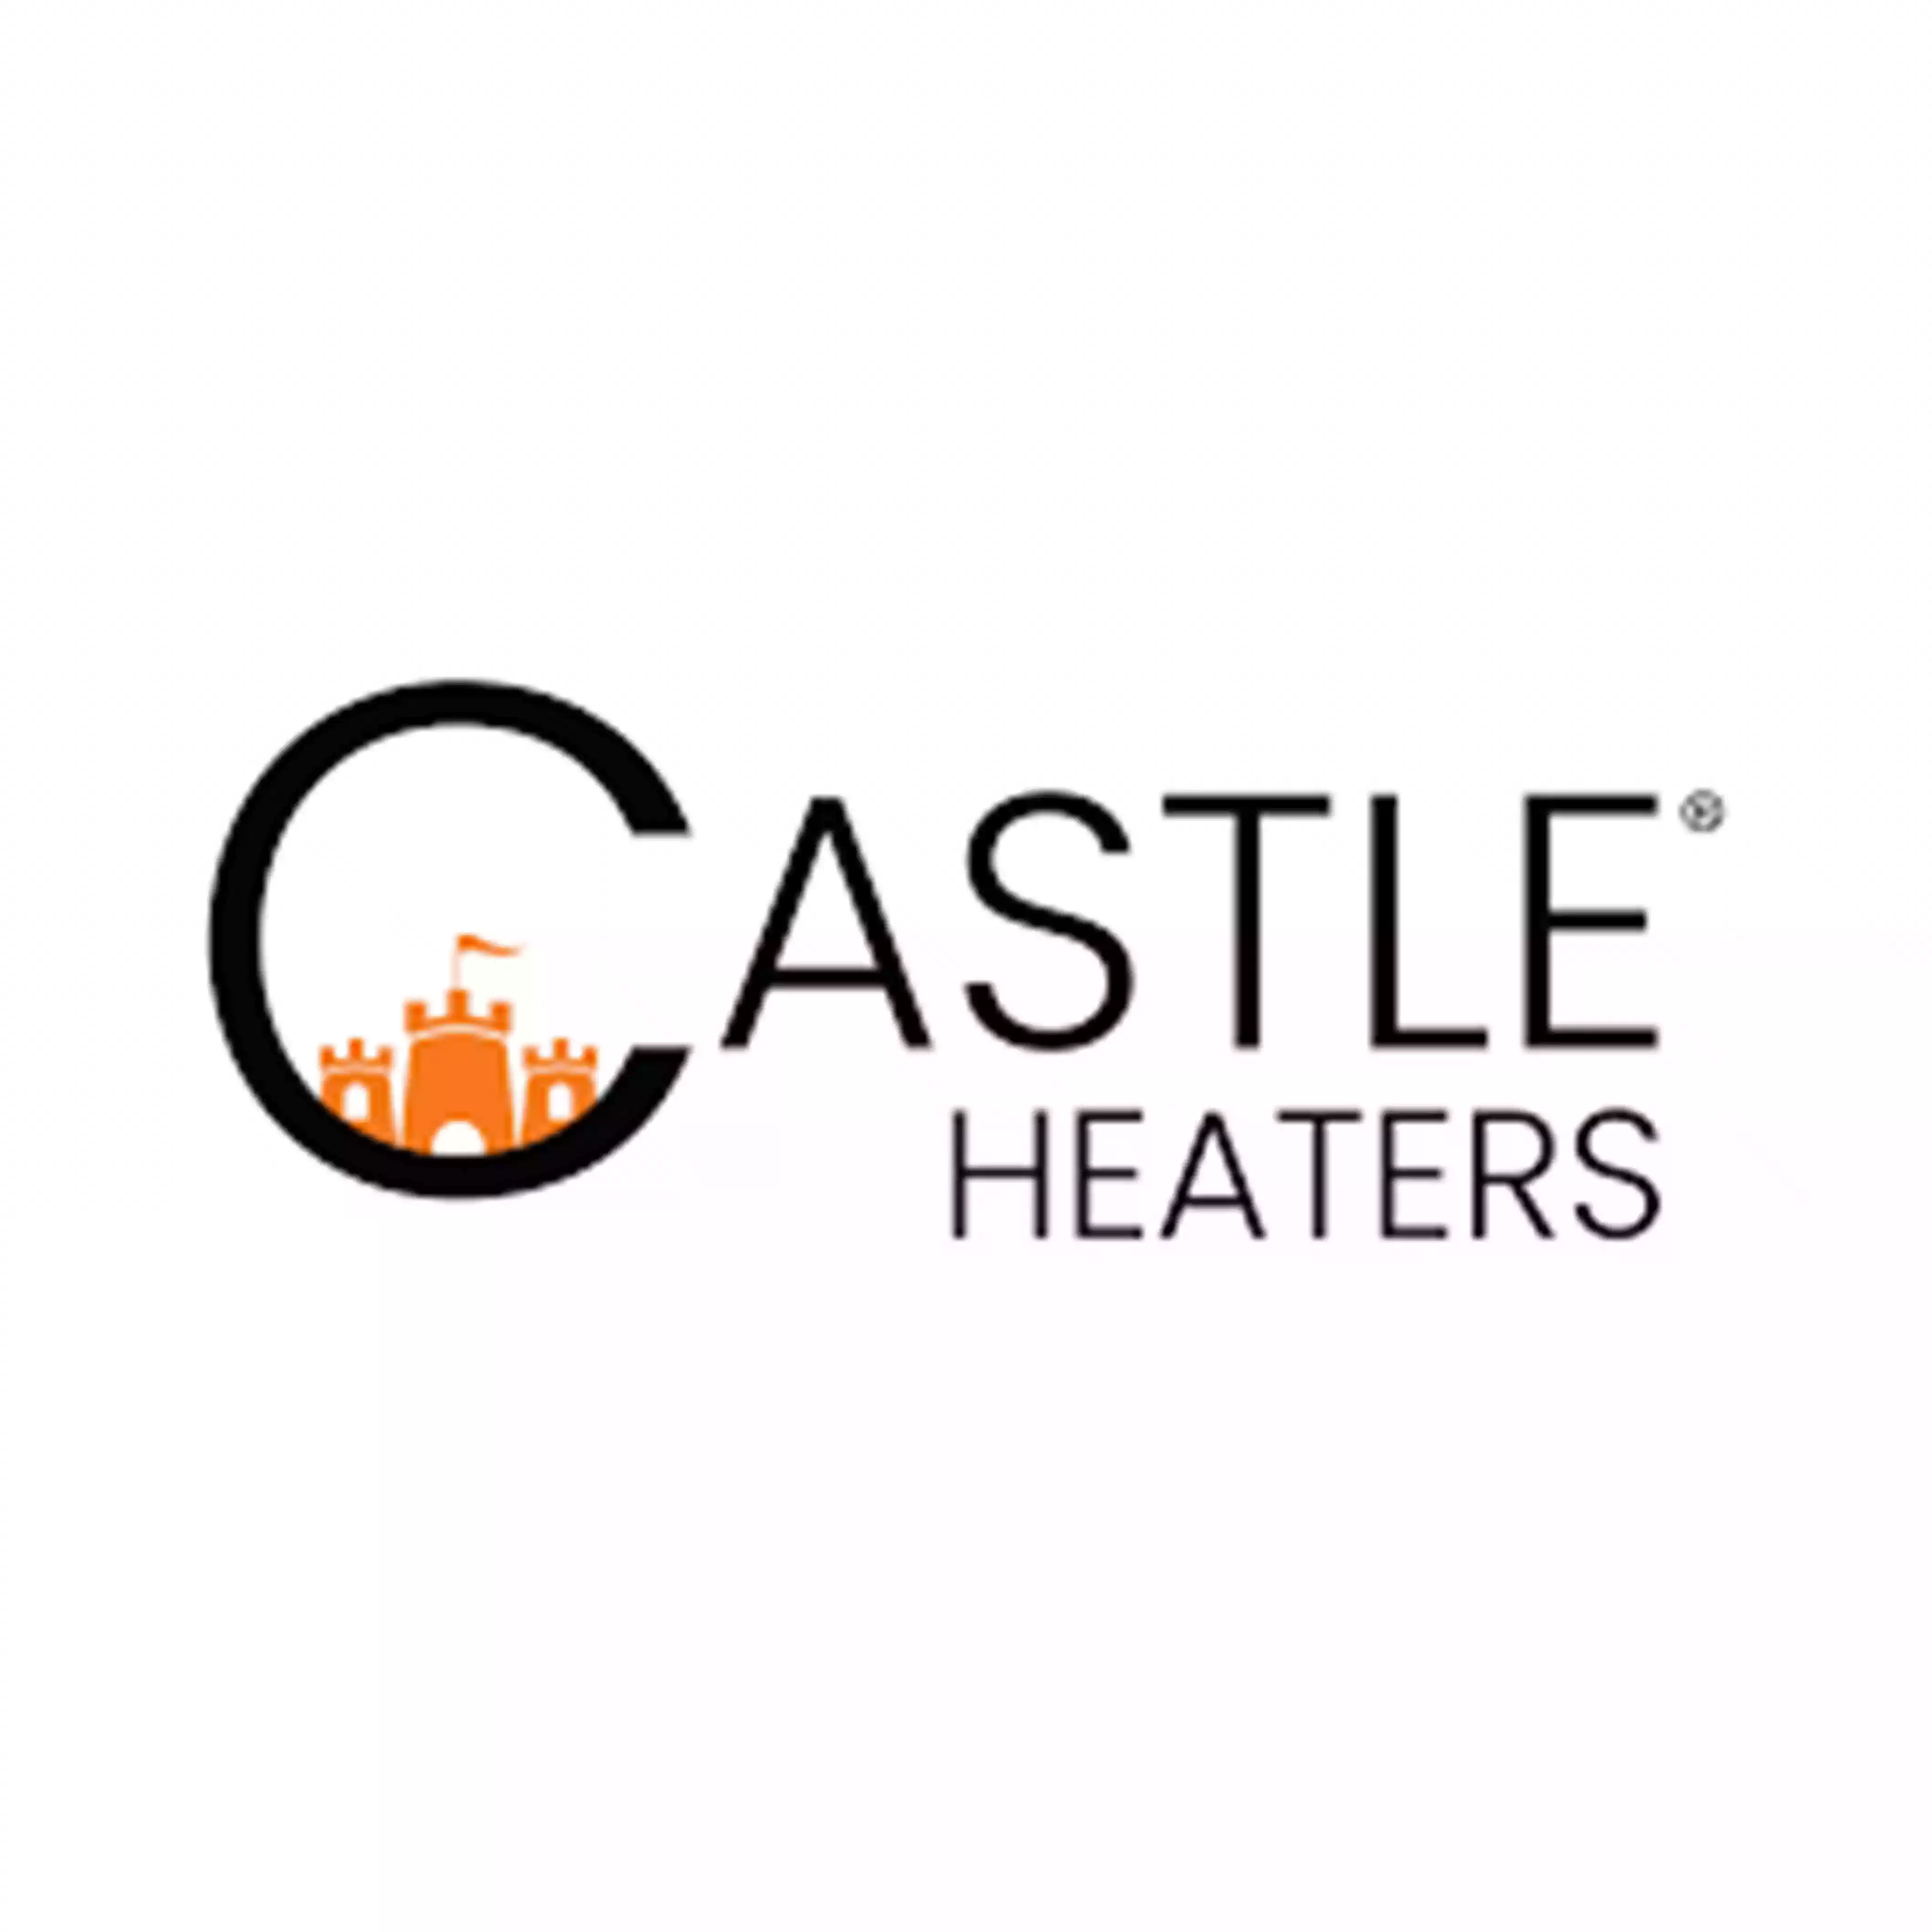 Castle Heaters coupon codes